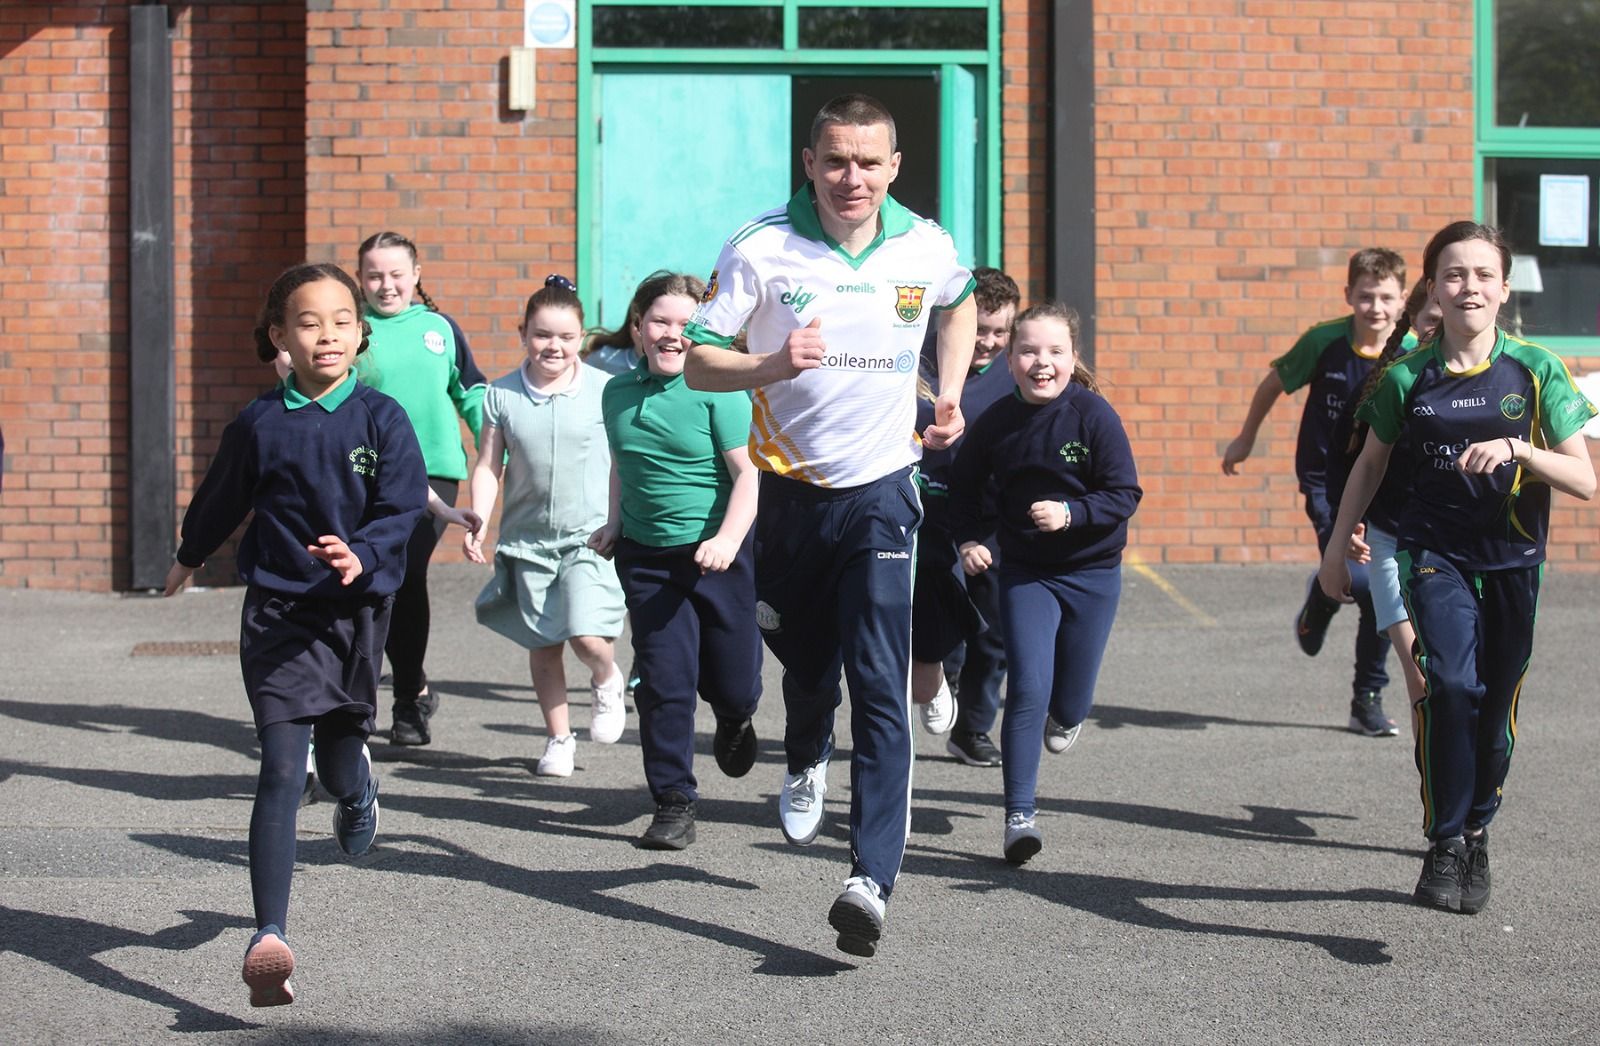 Seán and pupils from Gaelscoil na bhFál get fired up for their marathon running challenge